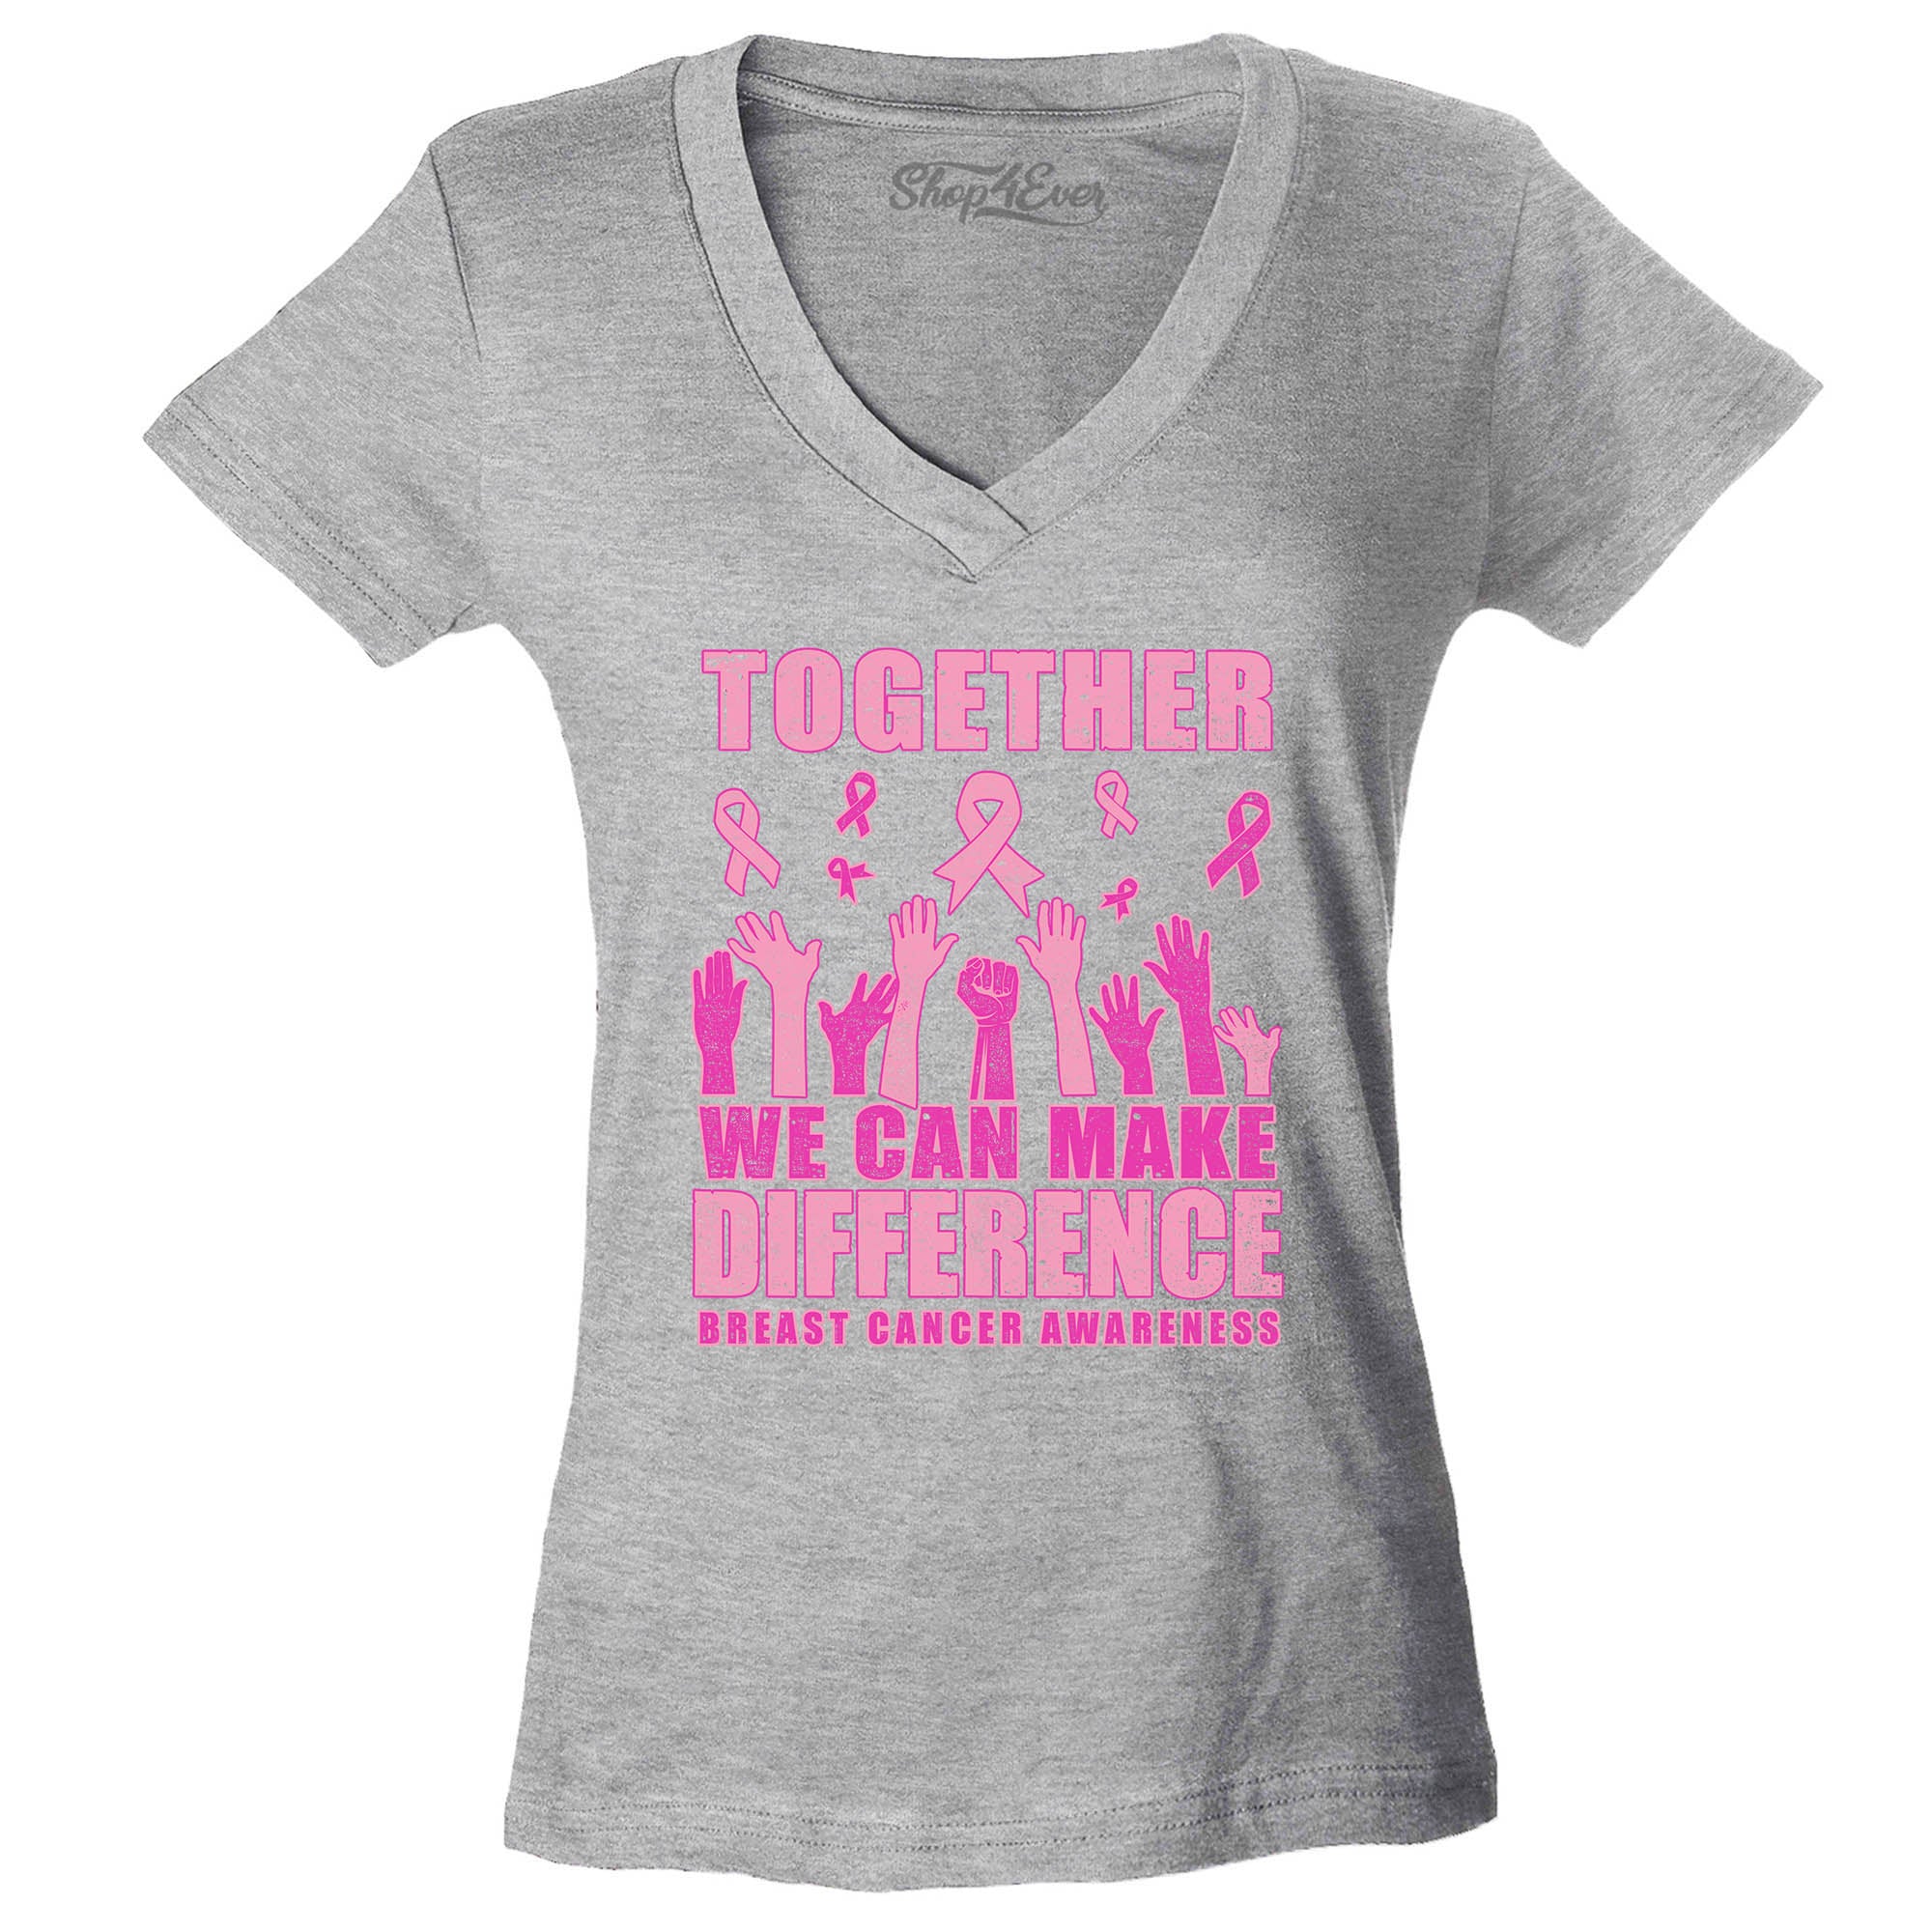 Together We Can Make A Difference Breast Cancer Awareness Women's V-Neck T-Shirt Slim Fit